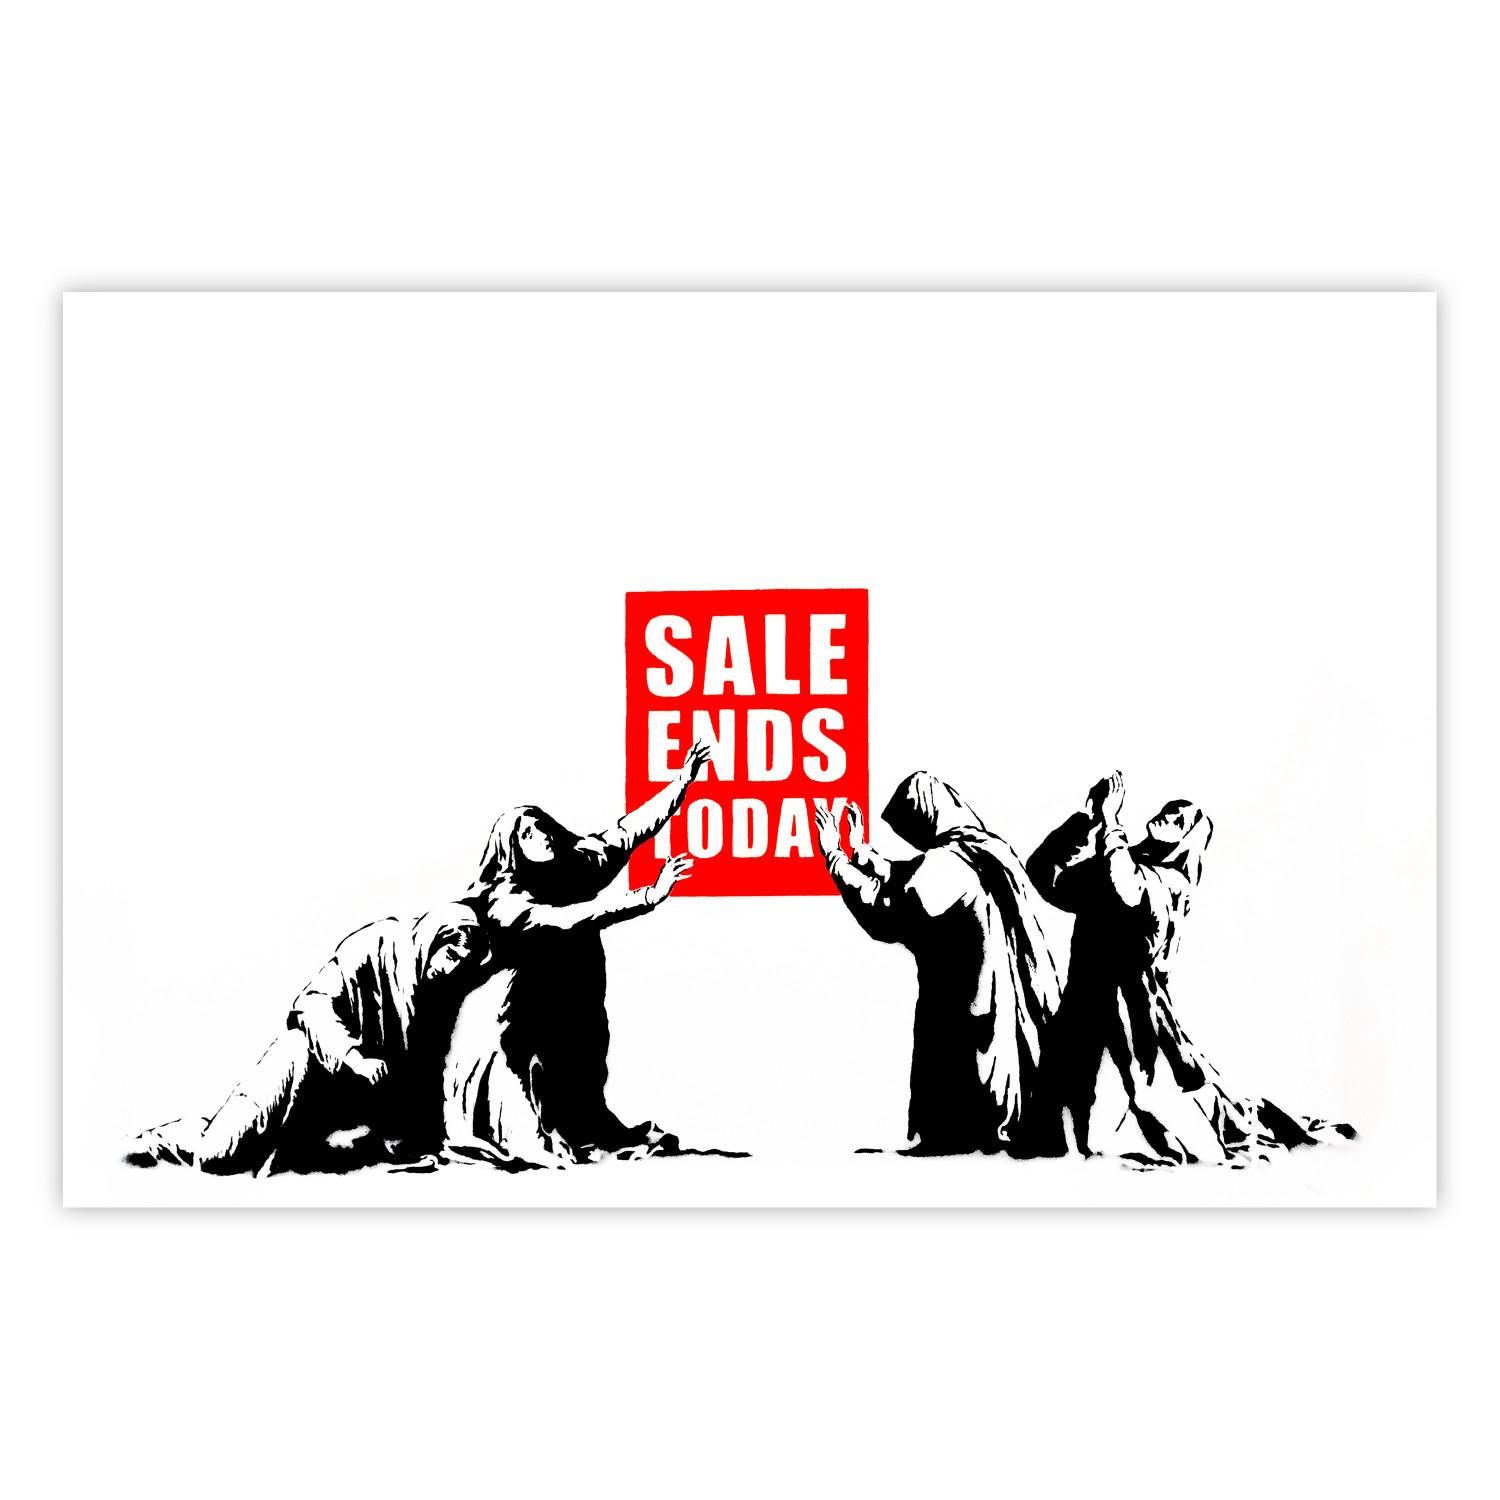 Poster Clearance Sale - Banksy-style graffiti with people and English texts